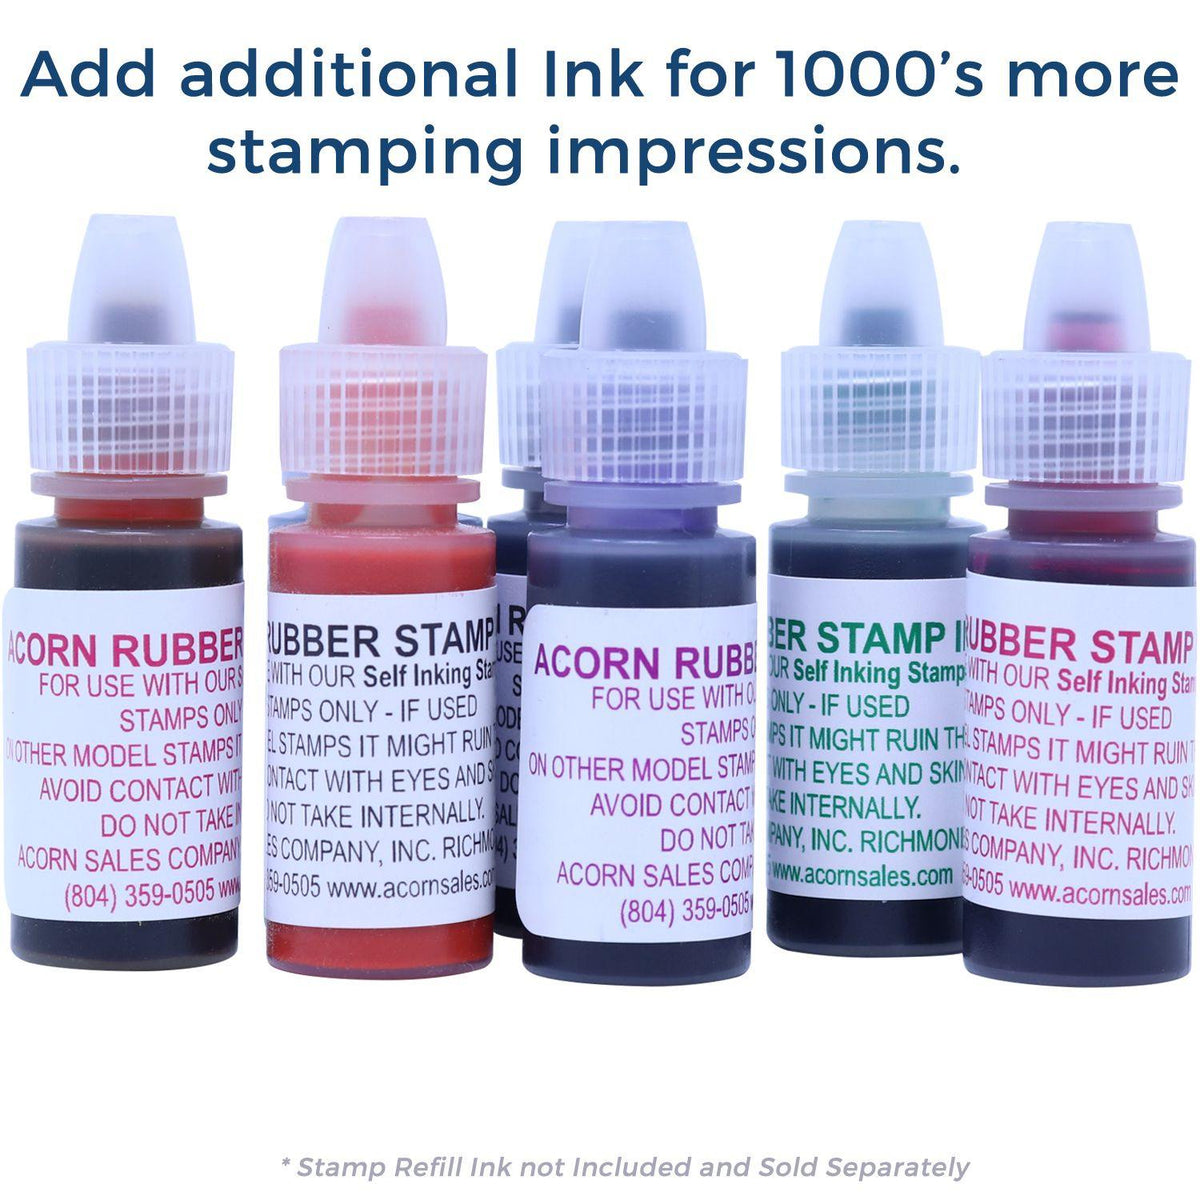 Refill Inks for Large Pre-Inked Covid-19 Stamp Available